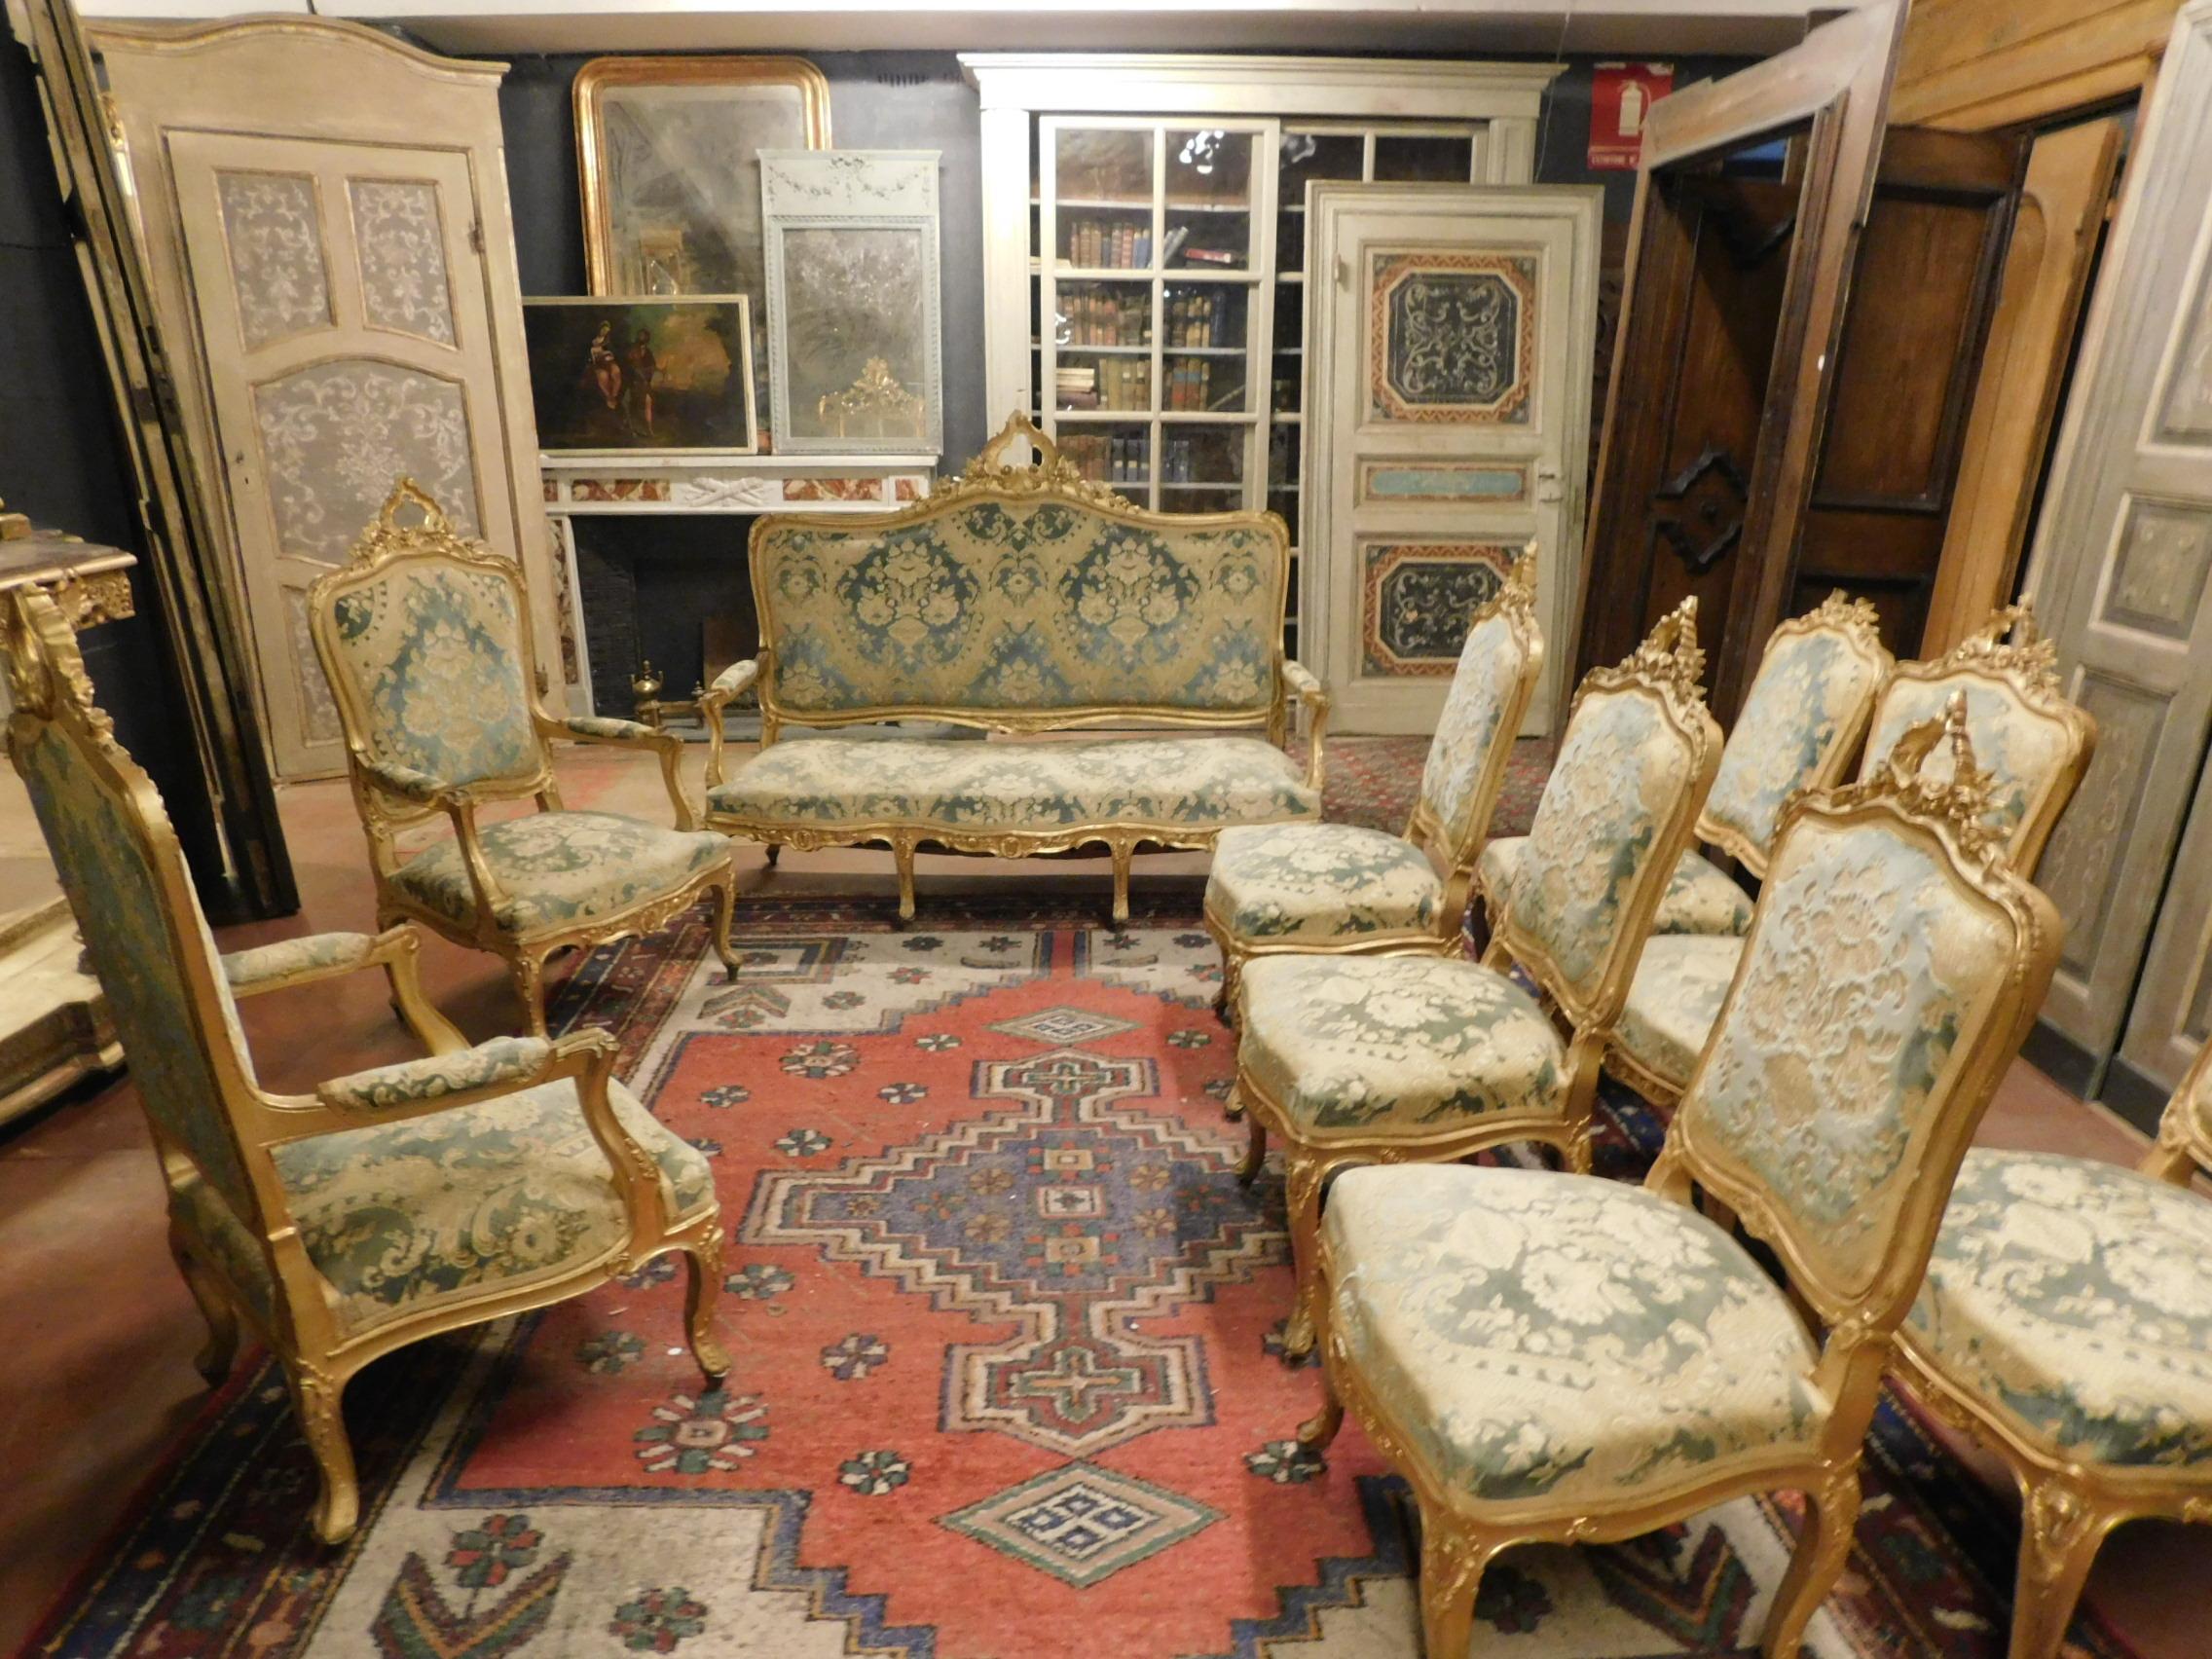 9 pieces antique living room sofa set, armchairs and benches, blue brocade fabric and gilded wood frame, complete in good condition, elegant and joyful colors, total pieces: 1 sofa, 2 armchairs and 6 chairs.
Beautiful and rare in these conditions,